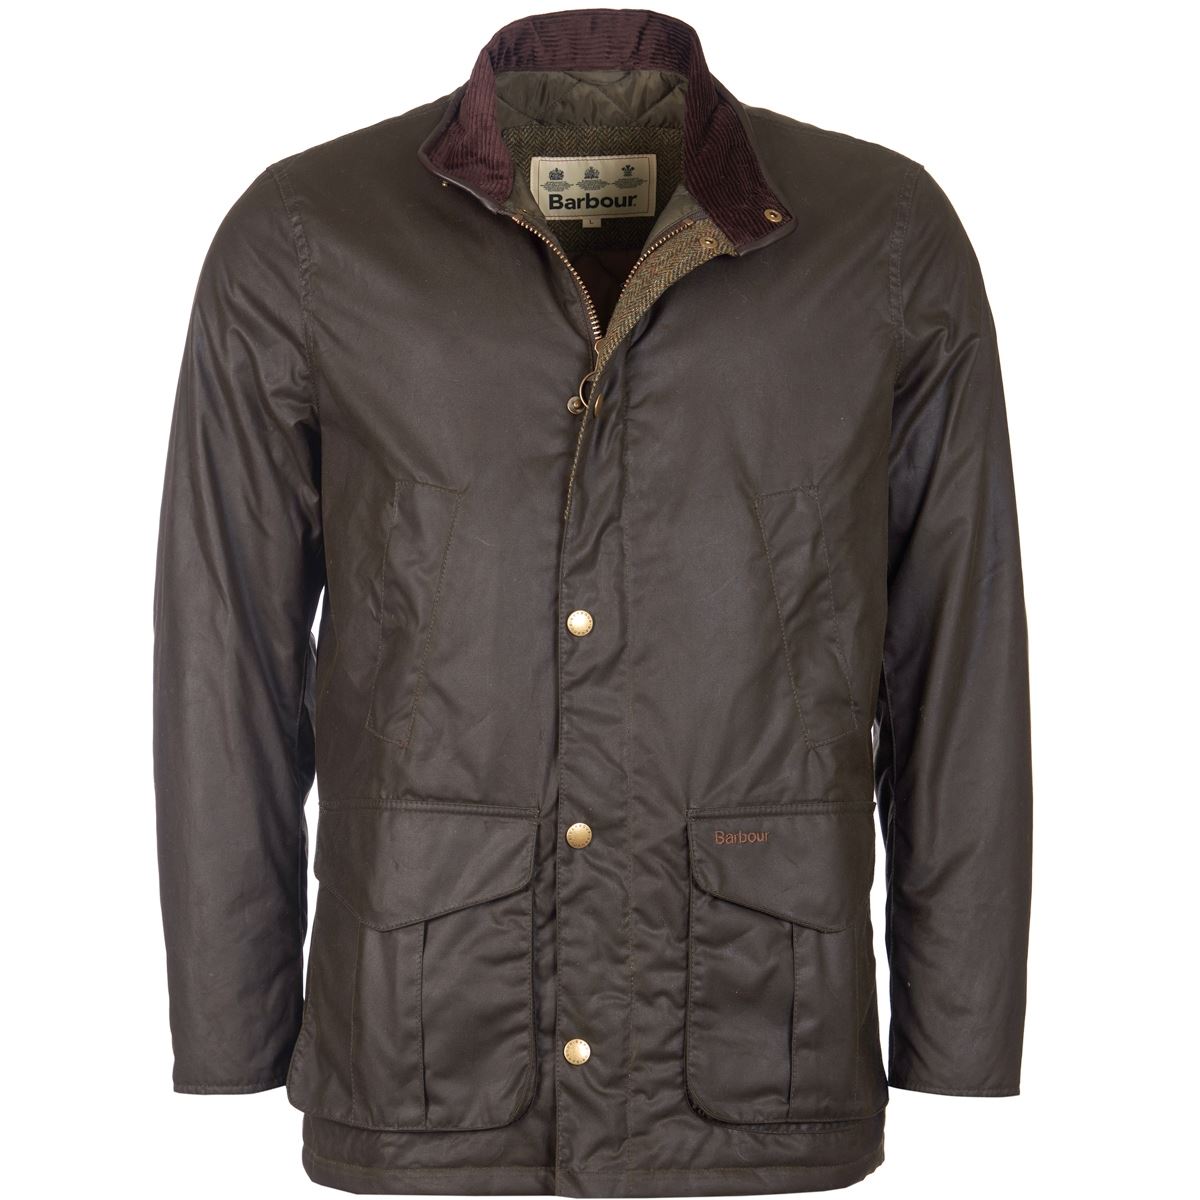 What was the purpose behind the creation of the Barbour Hereford jacket?